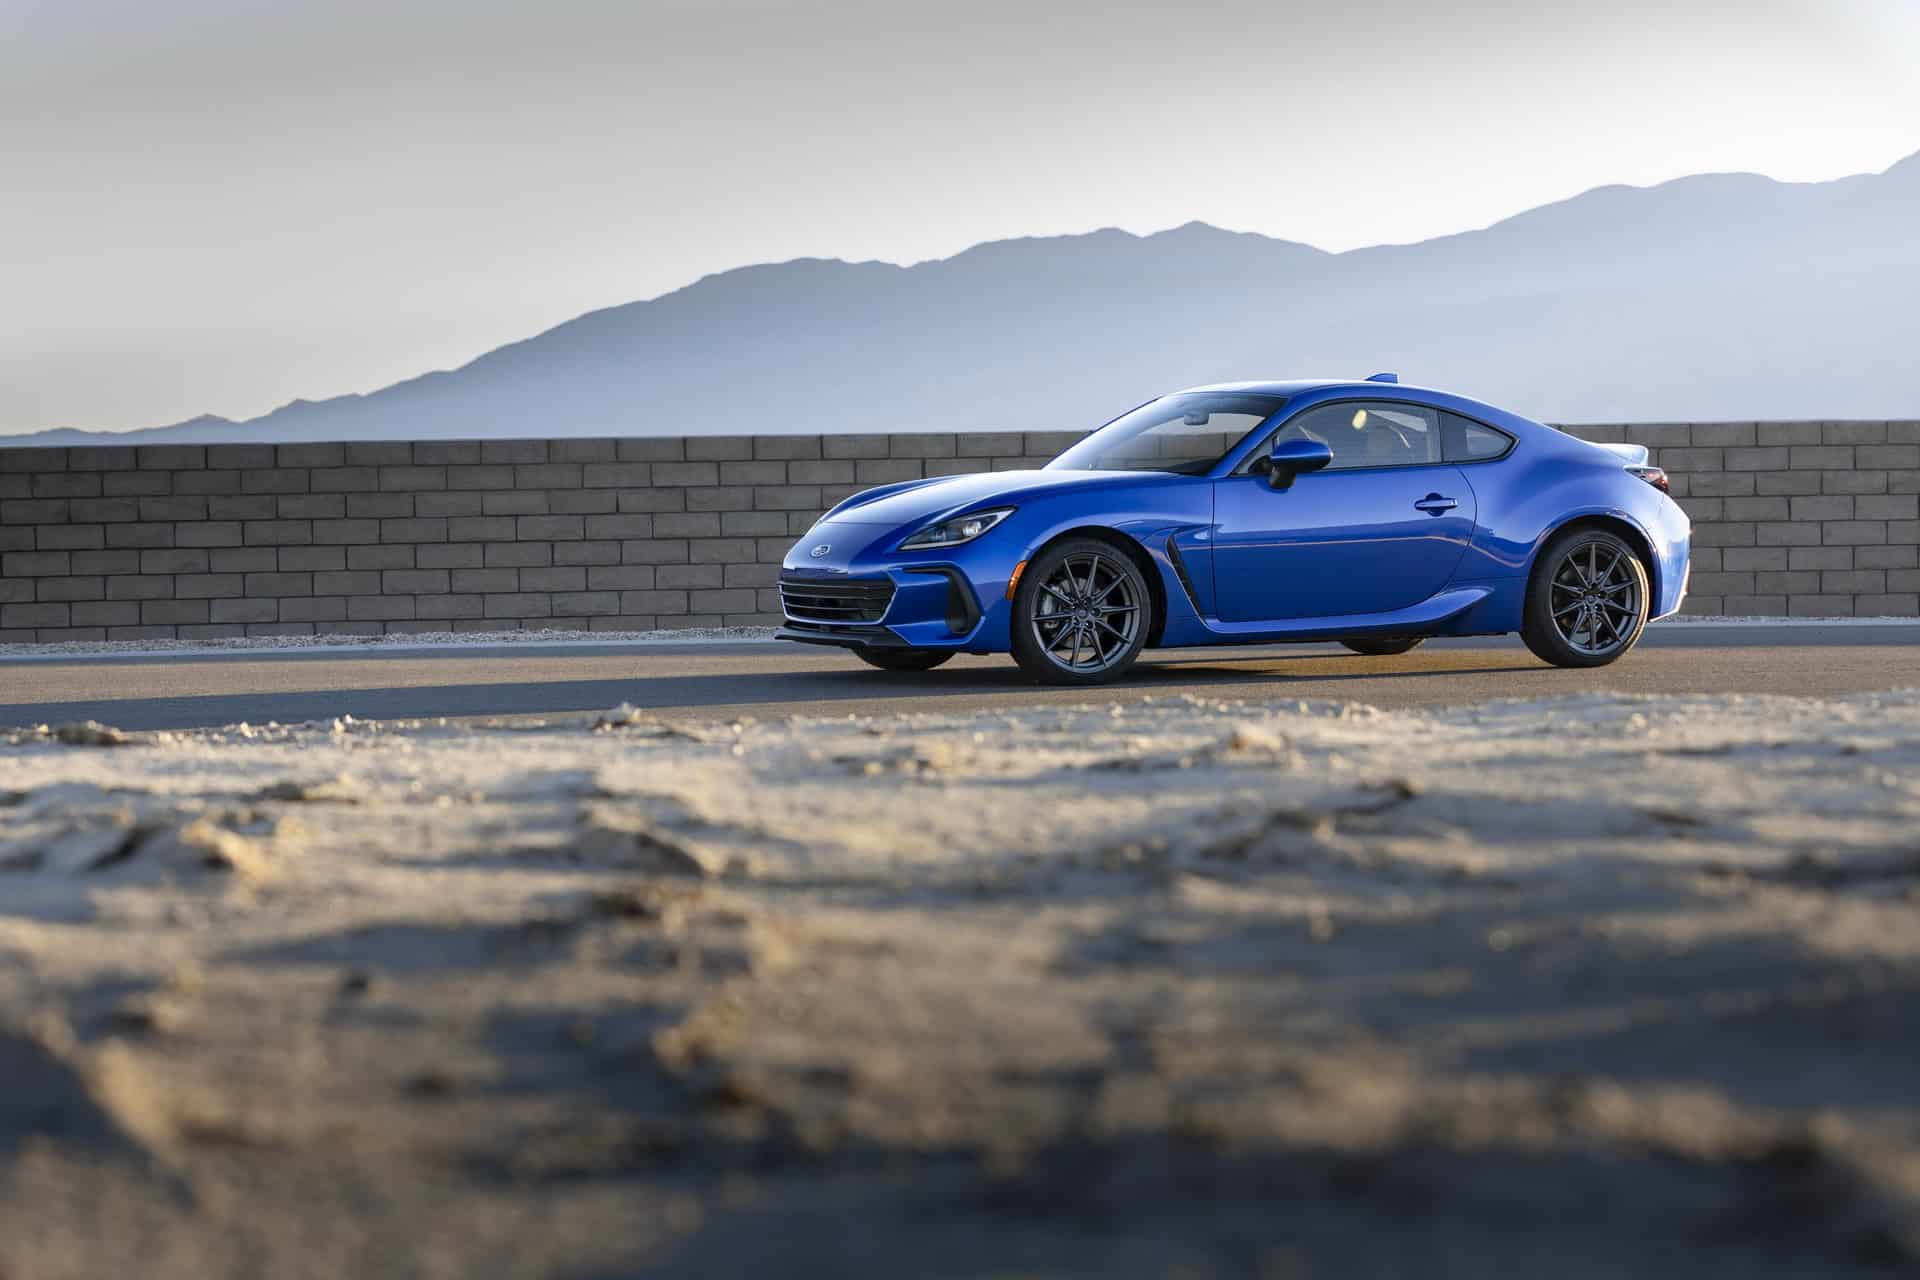 The All-New 2022 2.4-Litre Naturally-Aspirated Subaru BRZ